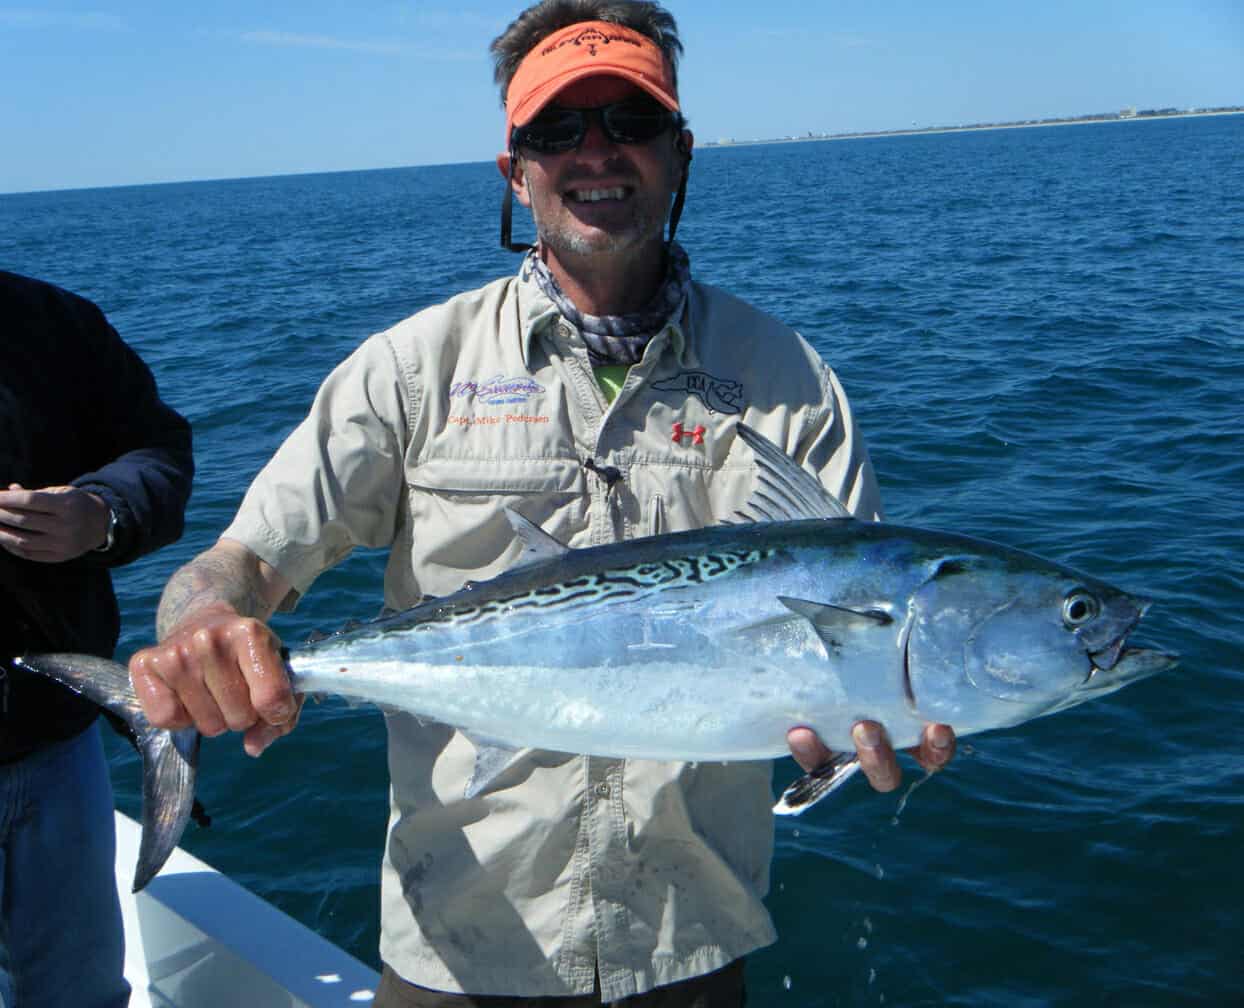 Capt Mike Fishing - NX Fishing Charters - Riley Rods - Team North Fork Composites 21